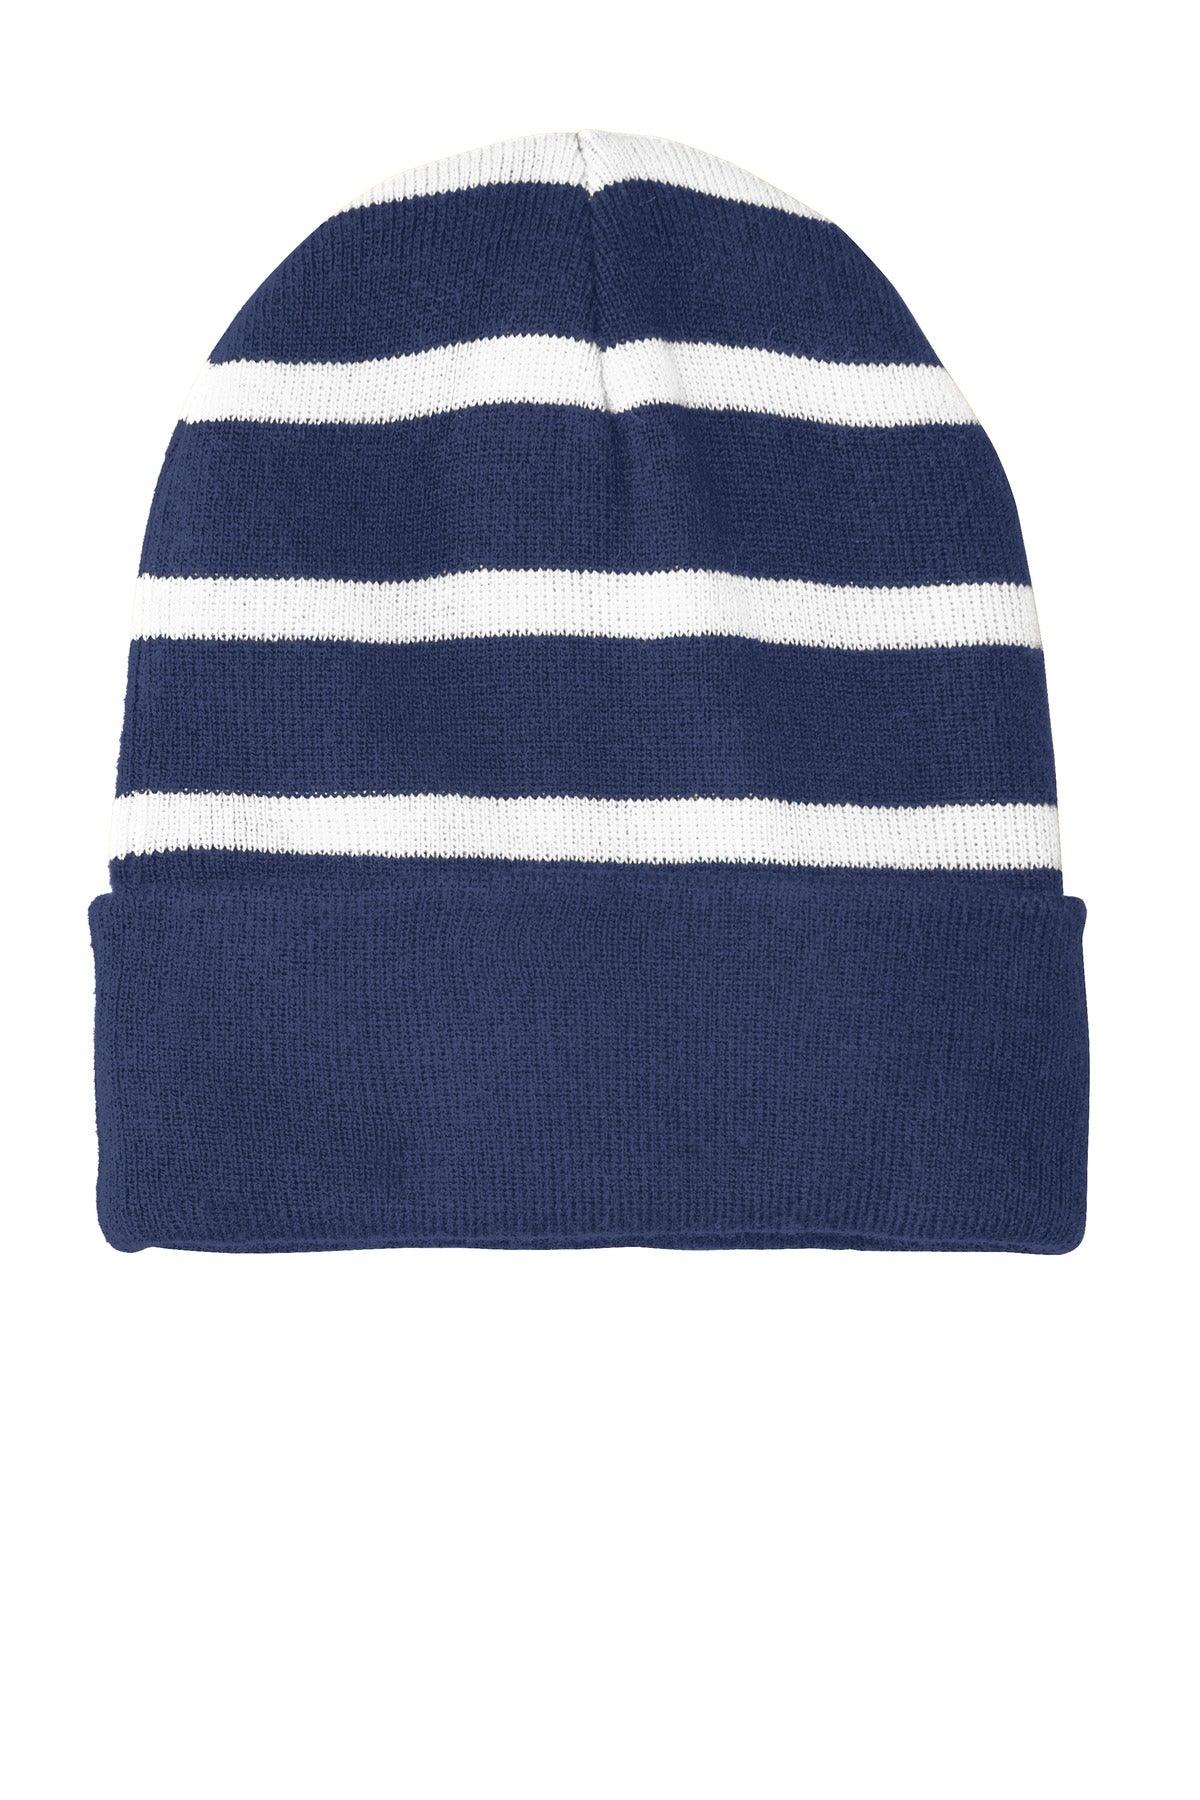 Sport-Tek Striped Beanie with Solid Band. STC31 - Dresses Max